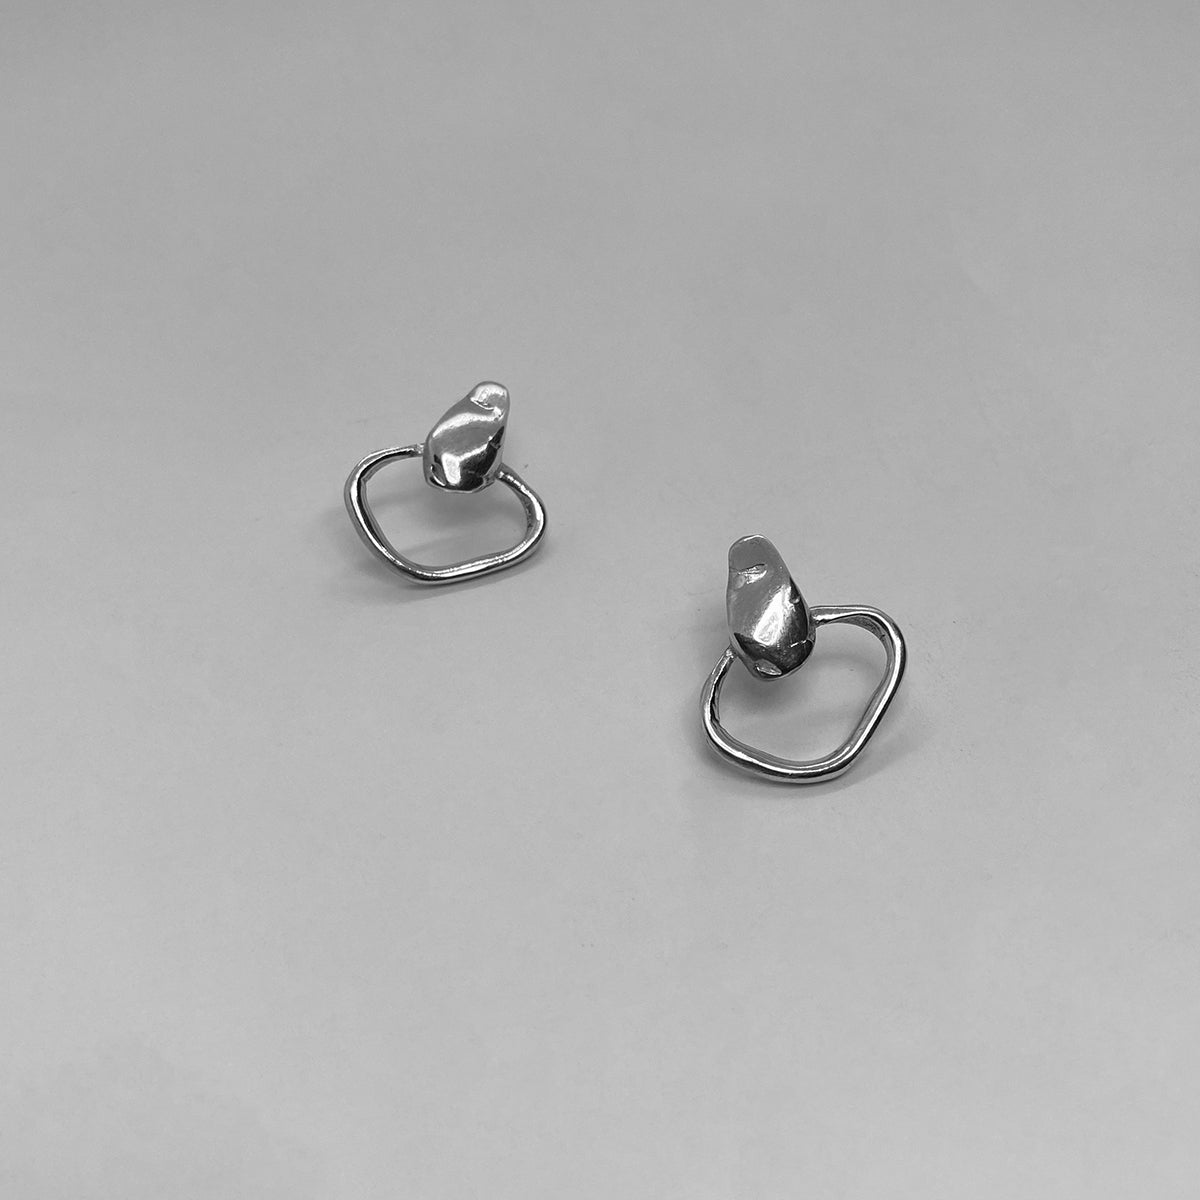 The Circle Drops earrings are a handmade creation crafted from 925 sterling silver. The irregular, smooth, and glossy circle at the bottom creates a unique formation, while the wide silver strip at the top adds a subtle, smooth, and shiny element.